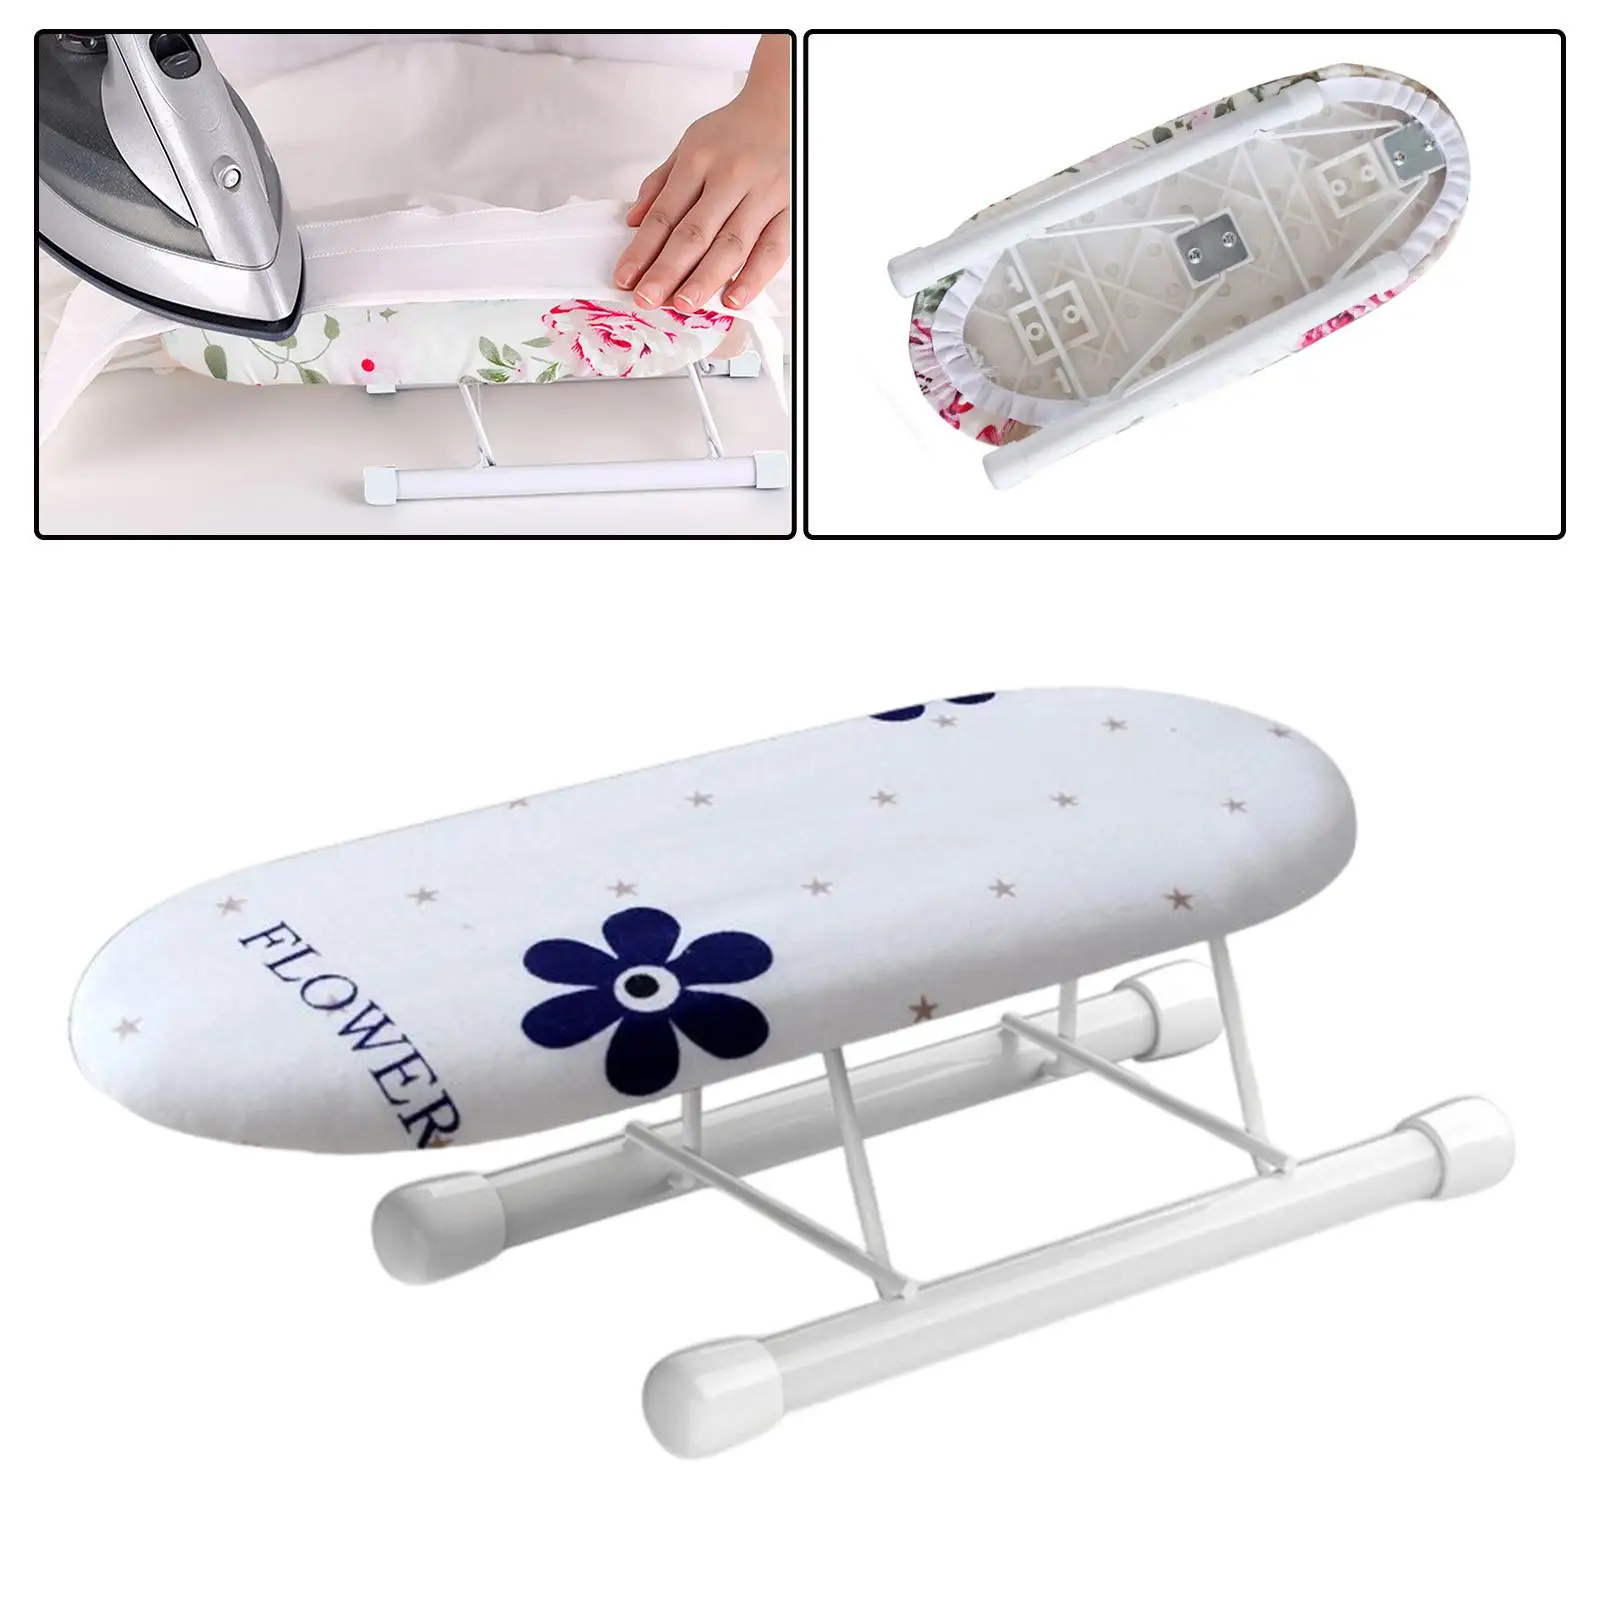 Portable Ironing Board Removable Sleeve Ironing Accessories for Countertop Room Dorms